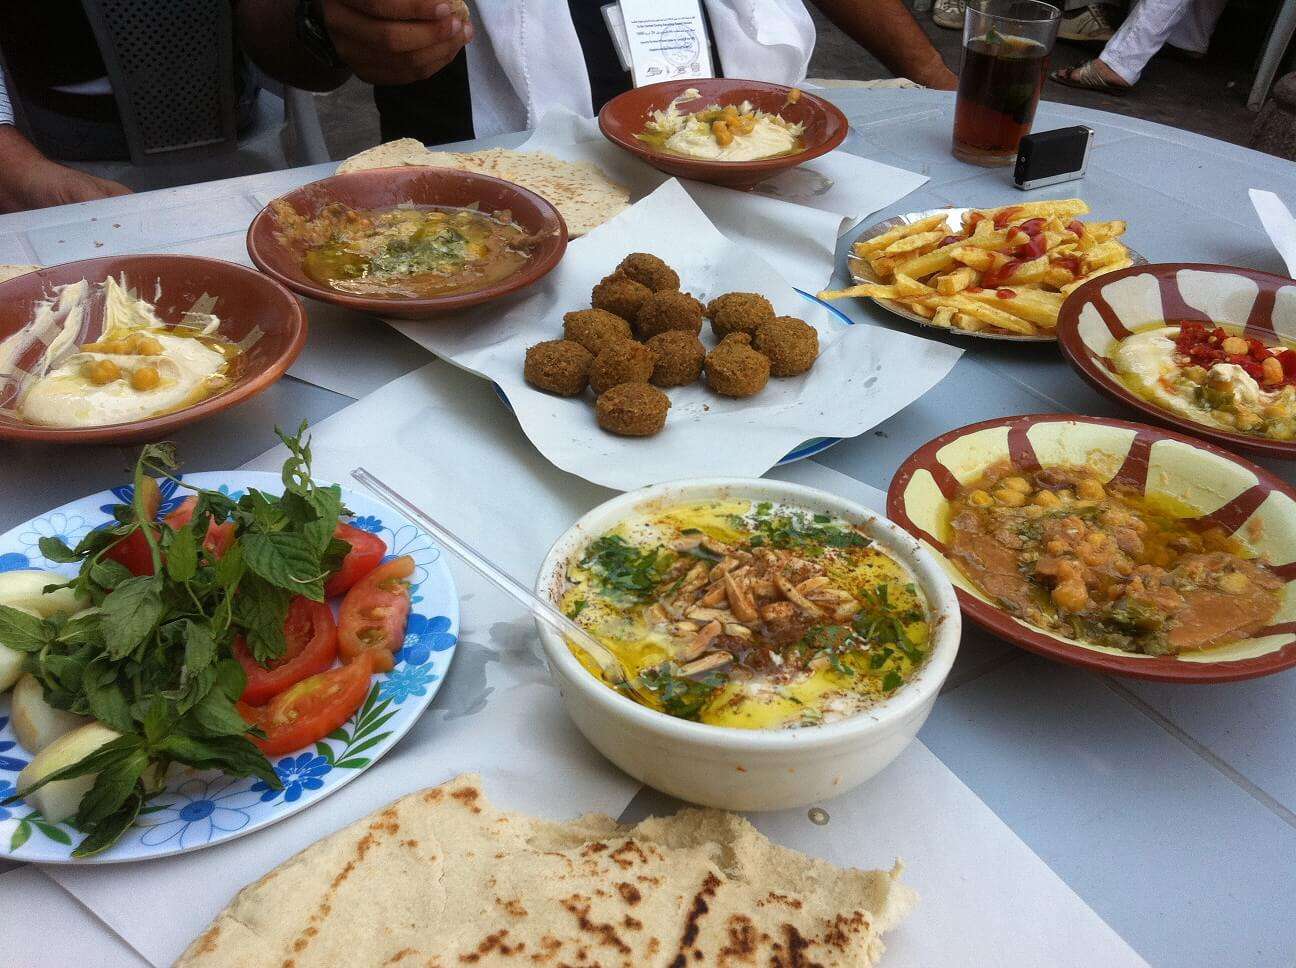 Jordanian authentic food on table